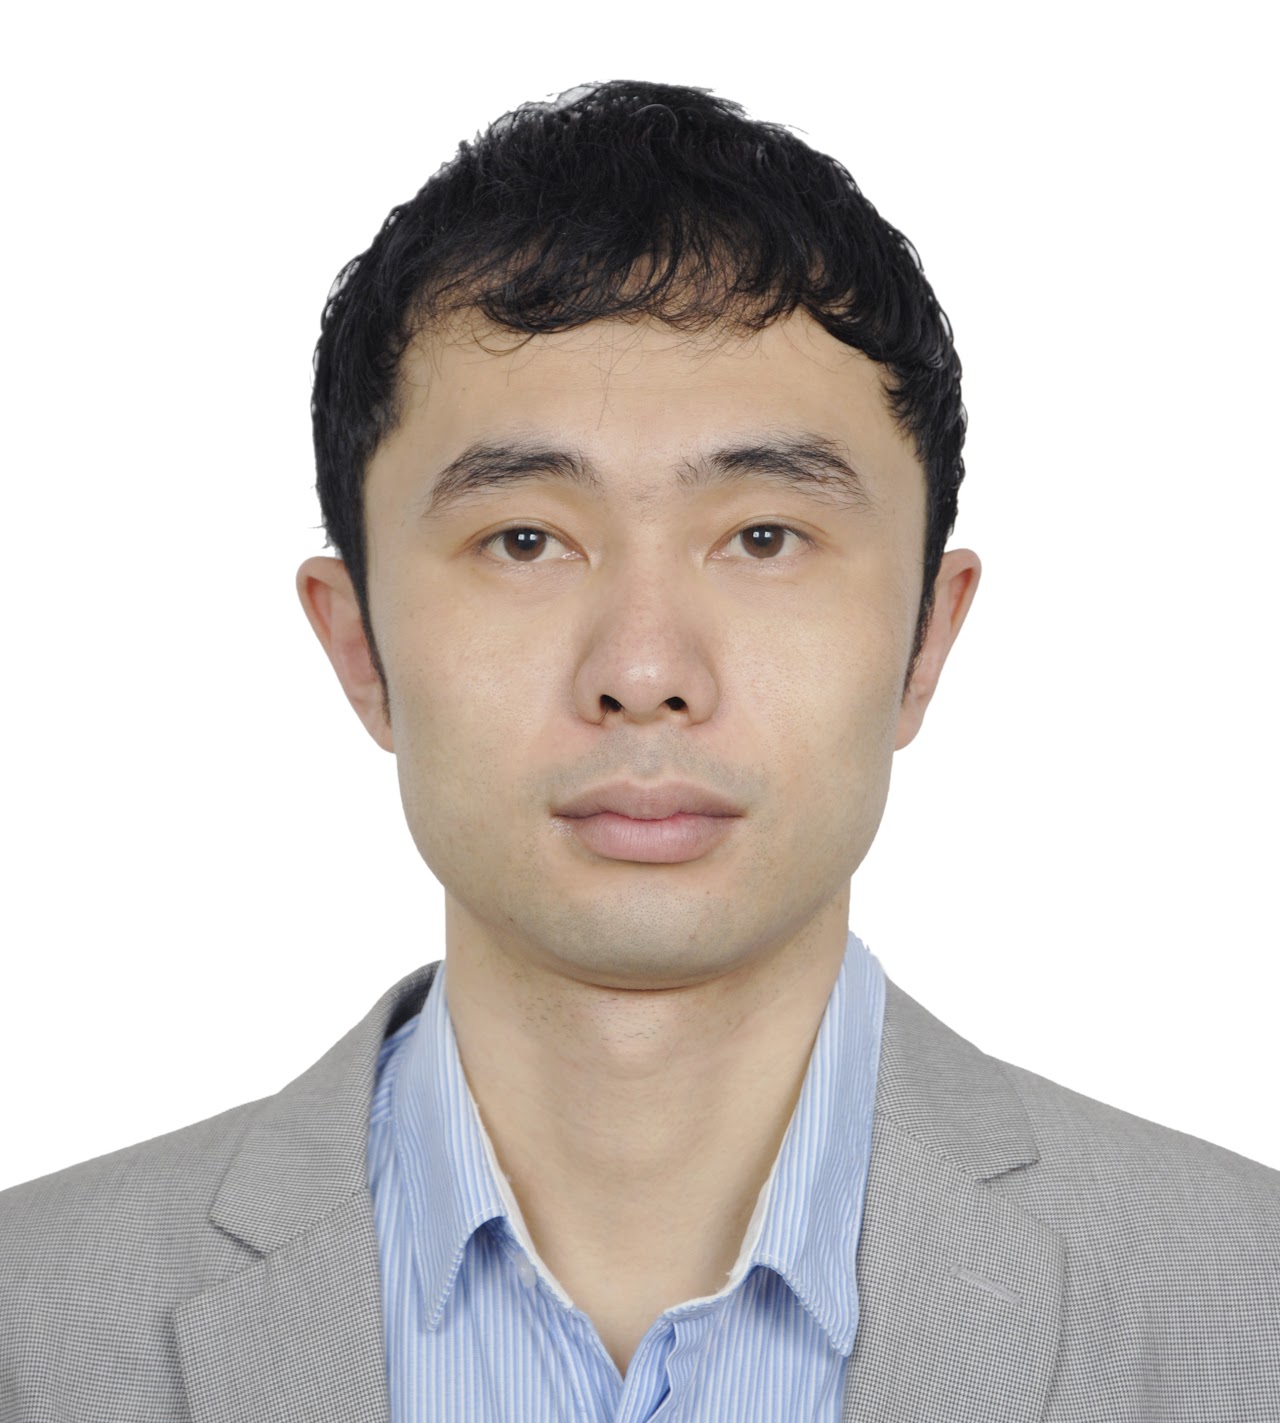 A headshot of Ran Song who has short black hair, wearing a grey suit with a light blue collared shirt with thin white stripes.